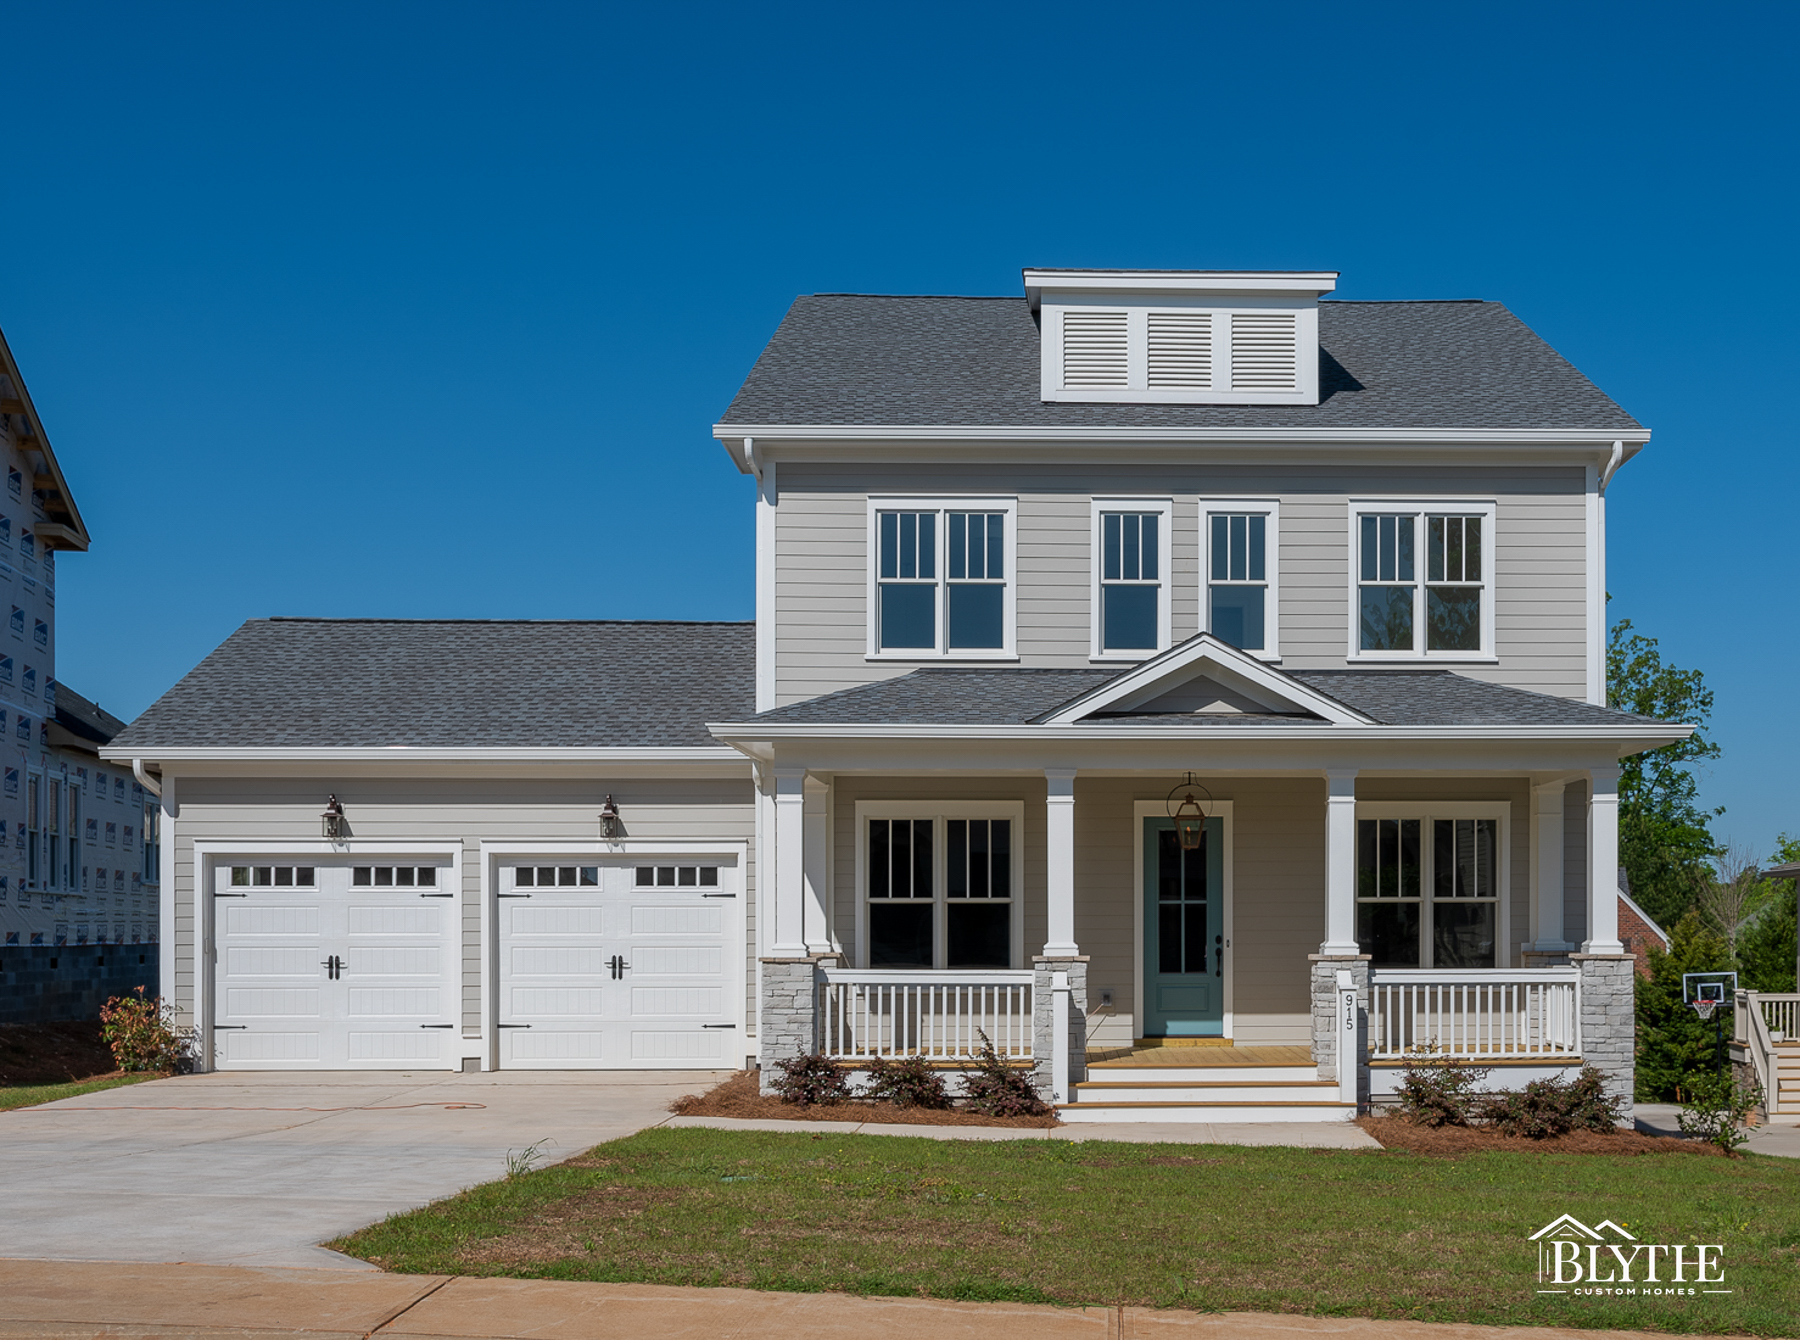 2-story home with gray Hardie plank siding, a front porch with white columns and stone bases, and 2-car garage with single carriage garage doors on sunny day with blue sky.